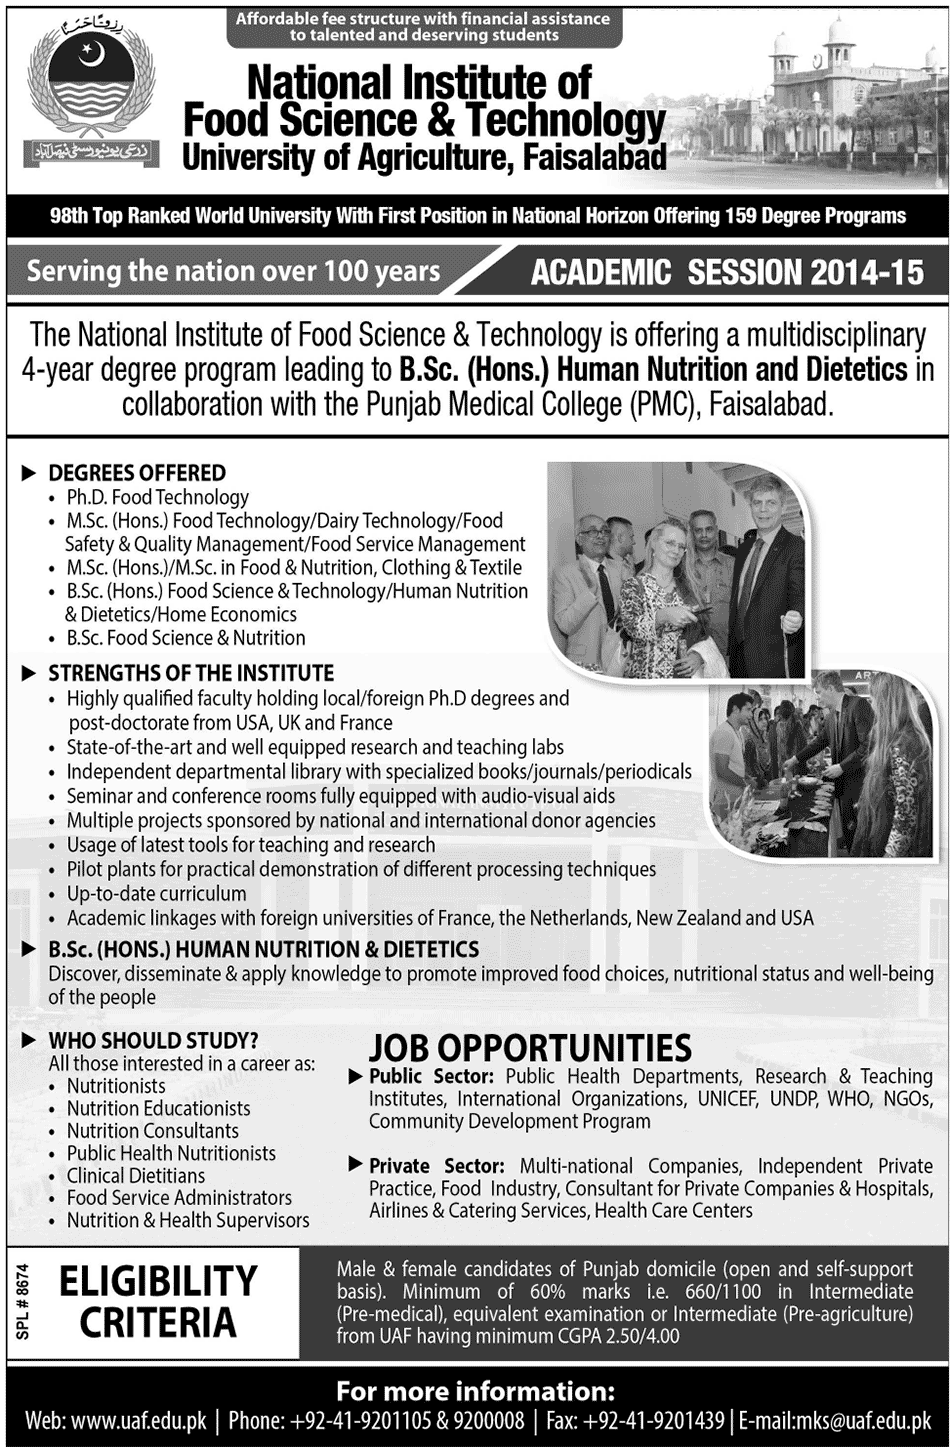 National Institute of Food Science and Technology Faisalabad Admission Notice 2014